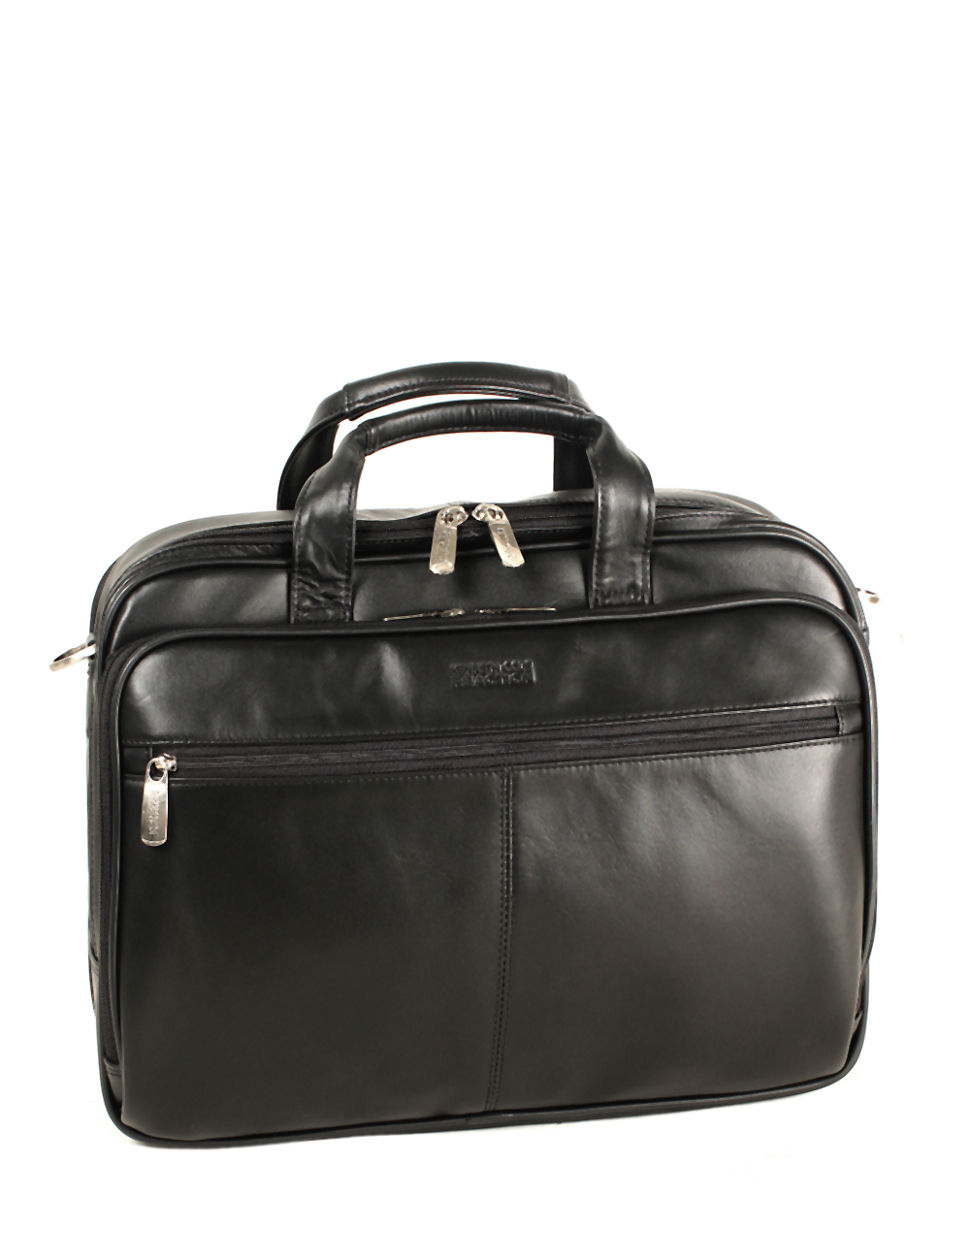 Lyst - Kenneth Cole Reaction Leather Portfolio Briefcase0125-524965 in ...